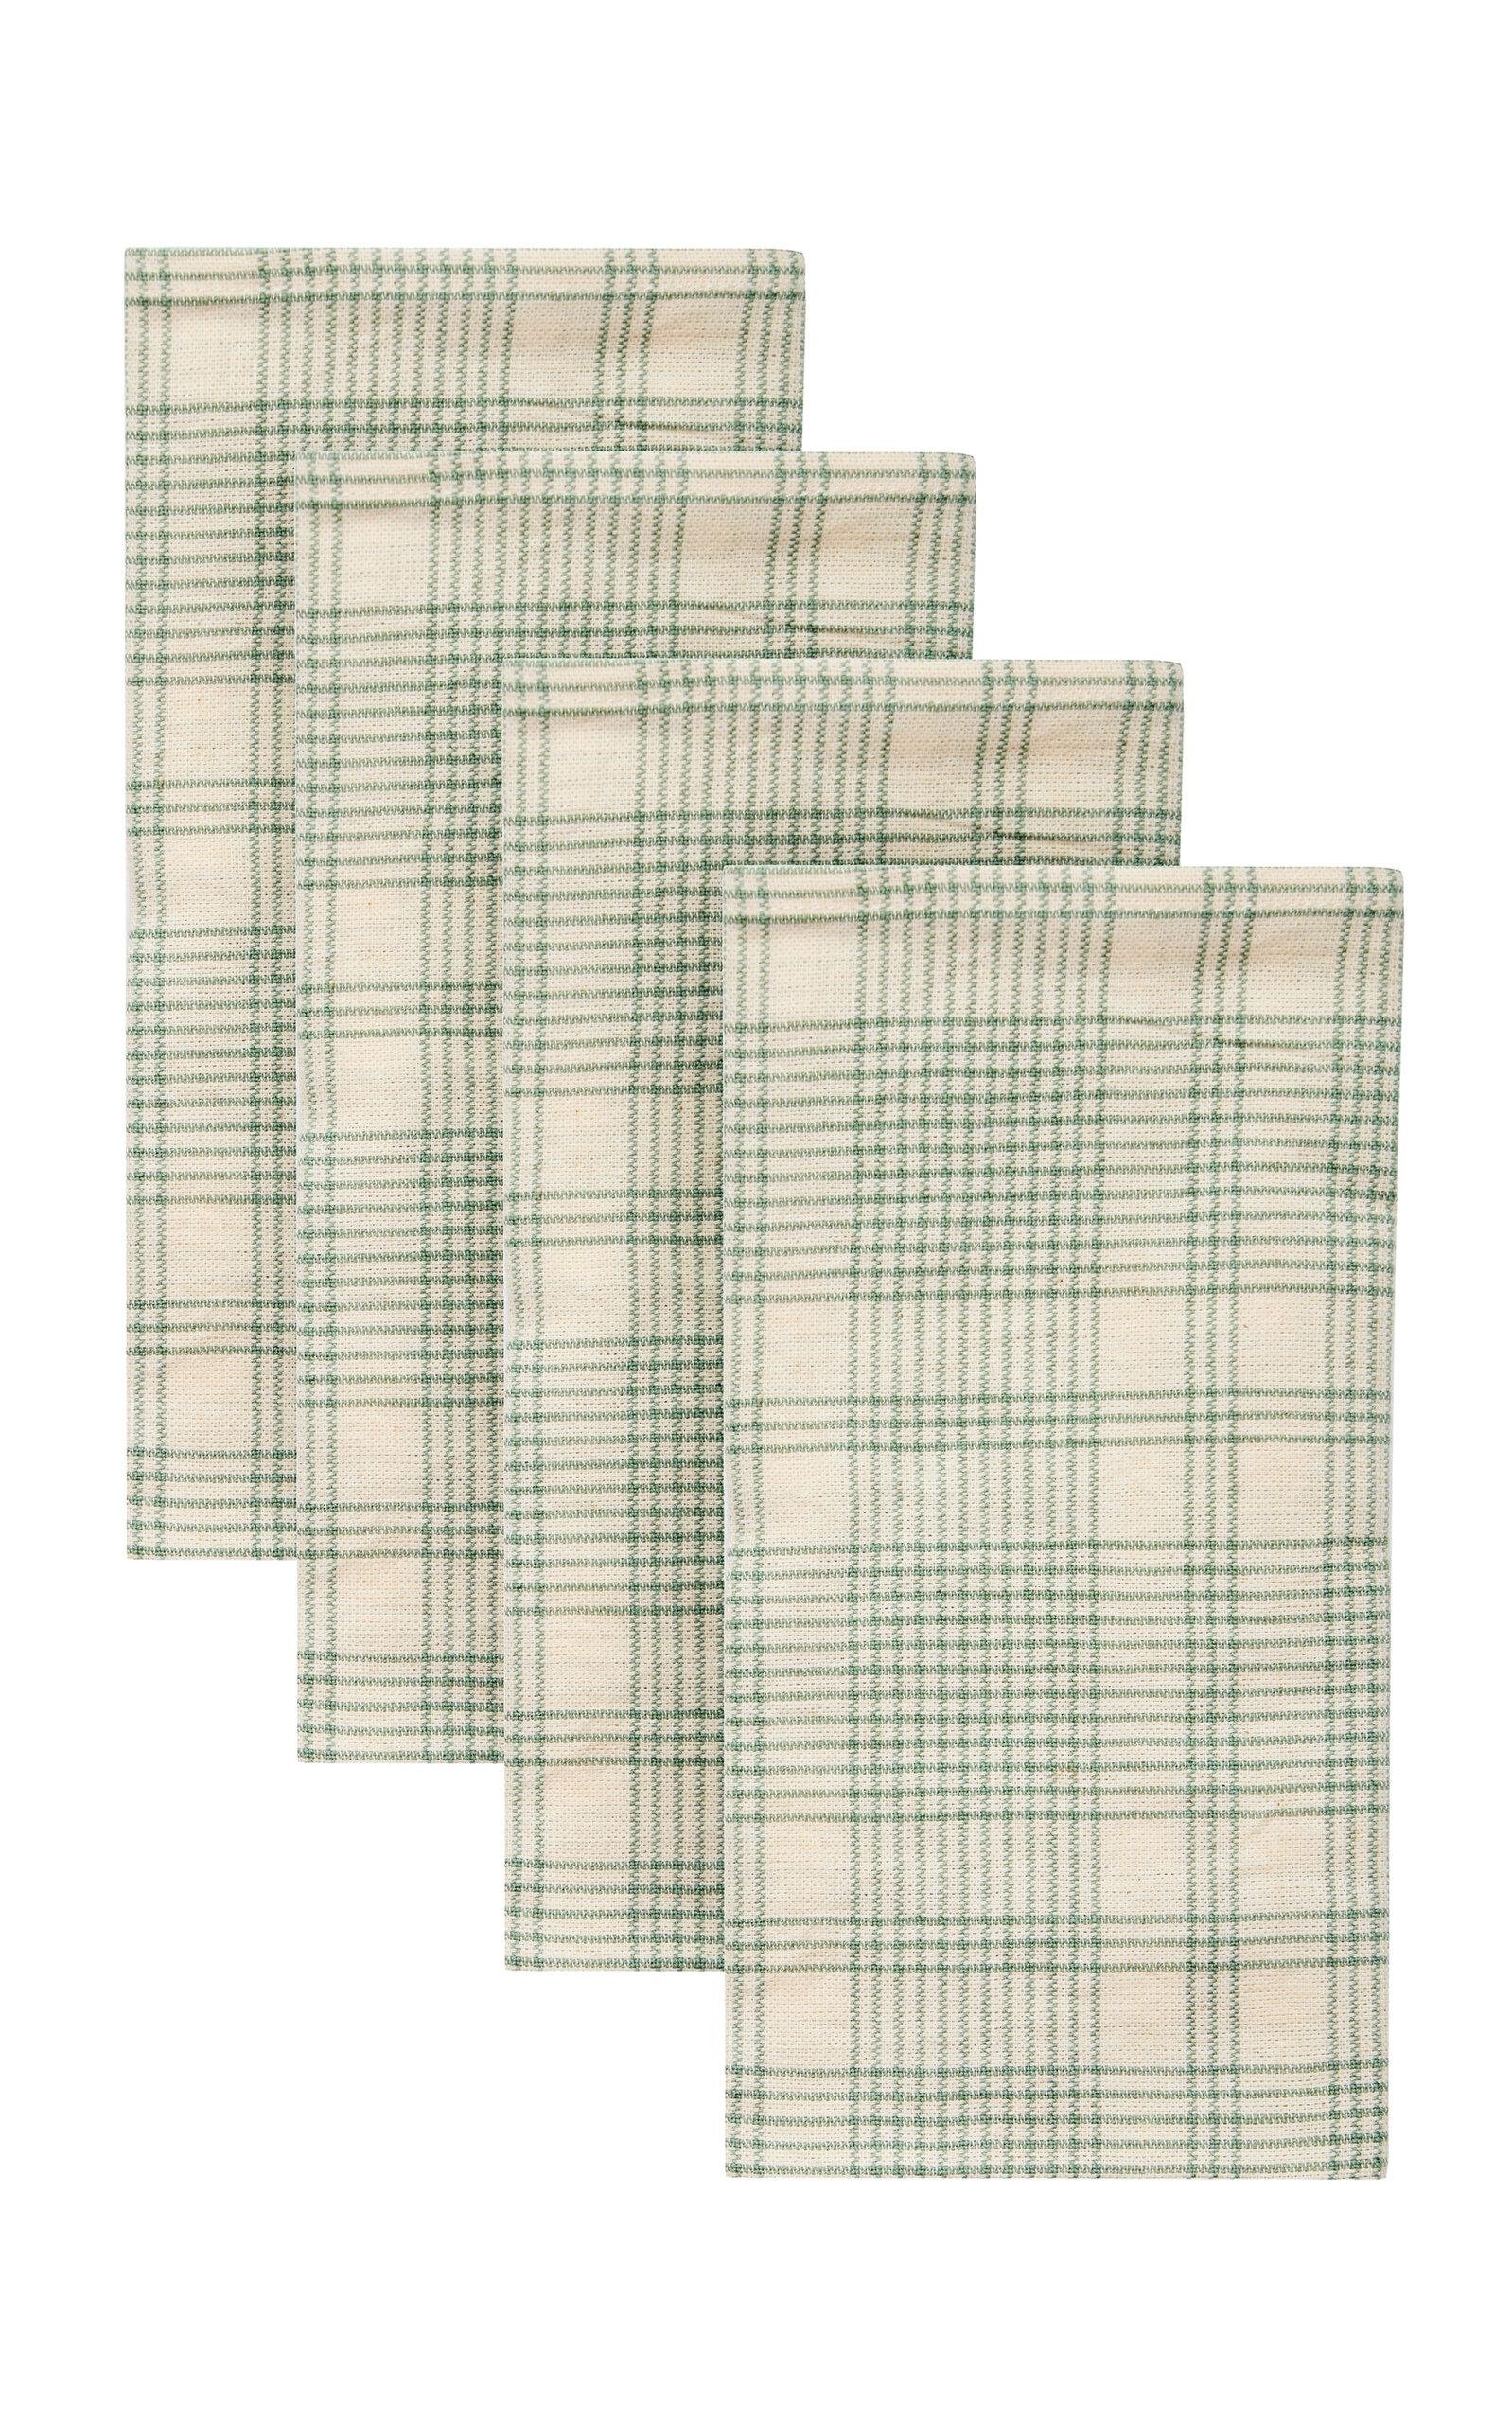 Heather Taylor Home - Set-of-Four Marianne Cotton-Plaid Napkins - Green - Moda Operandi by HEATHER TAYLOR HOME